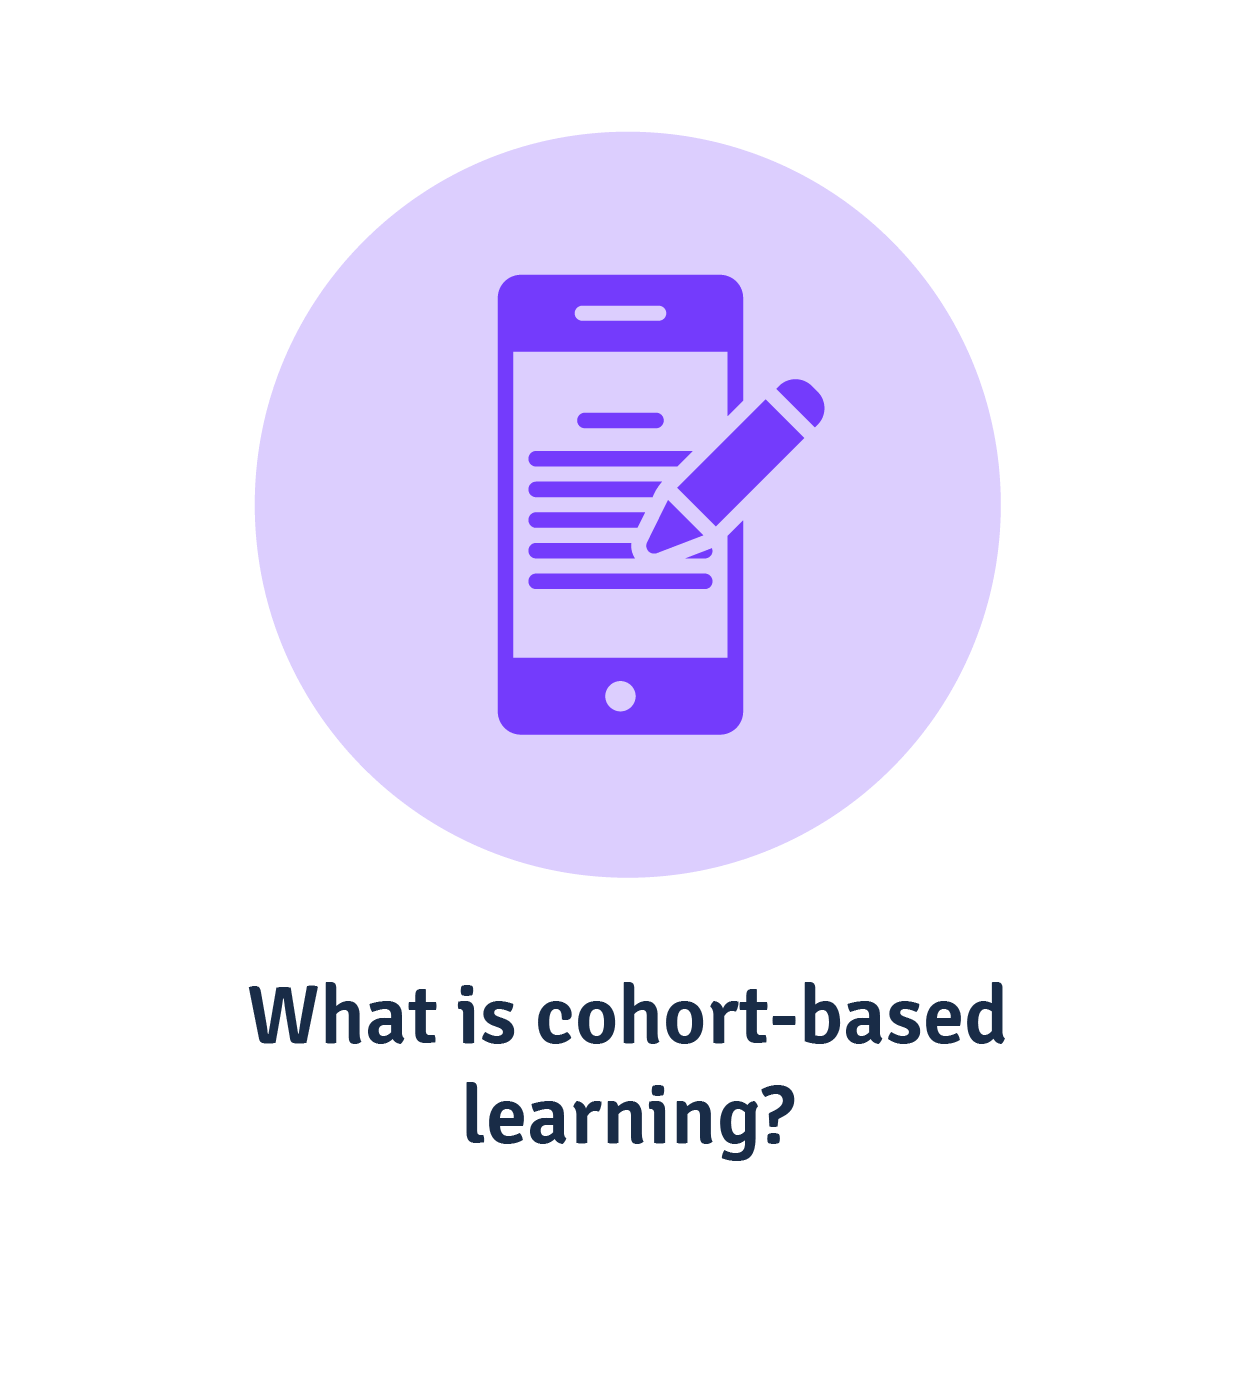 What is cohort-based learning?